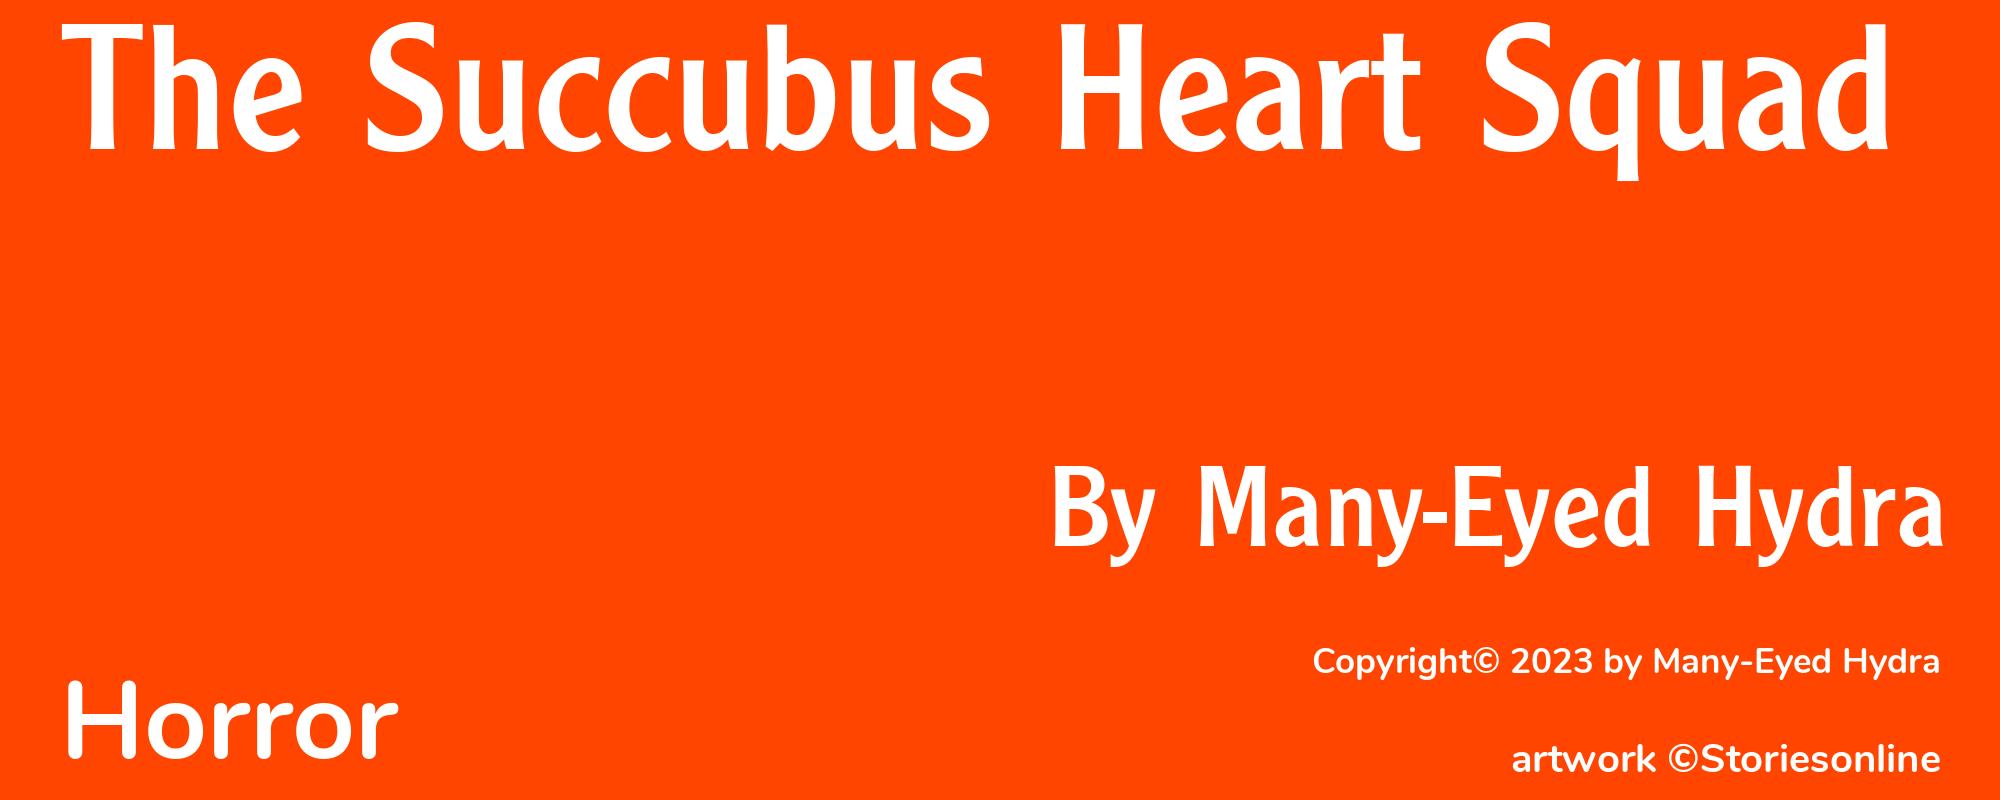 The Succubus Heart Squad - Cover